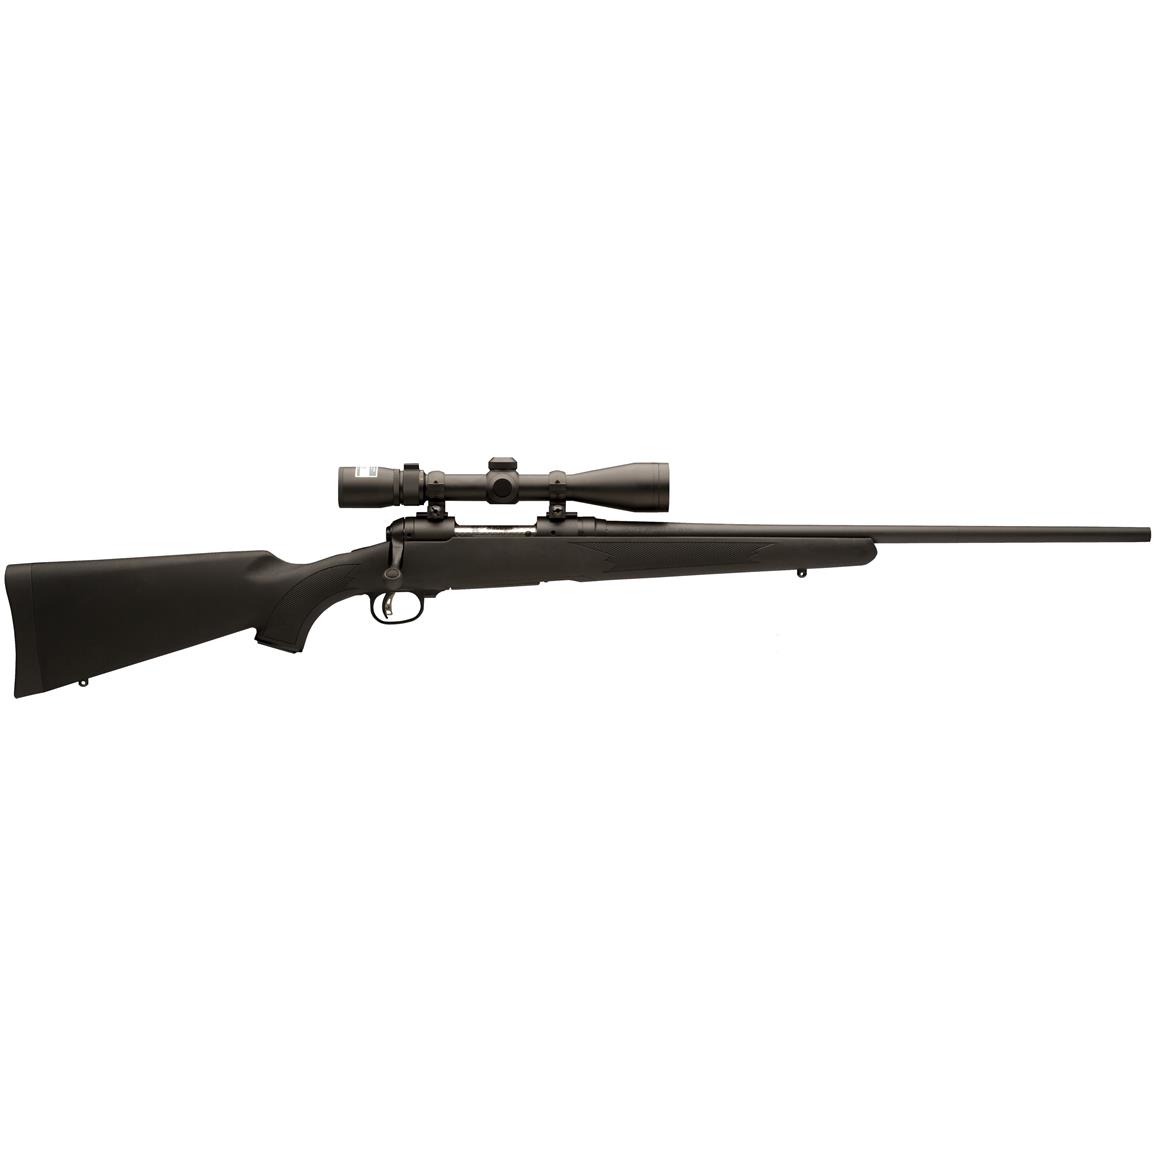 Savage 11 Trophy Hunter XP, Bolt Action, .243 Winchester, 22" Barrel, Nikon 3-9x40mm Scope, 5 Rounds